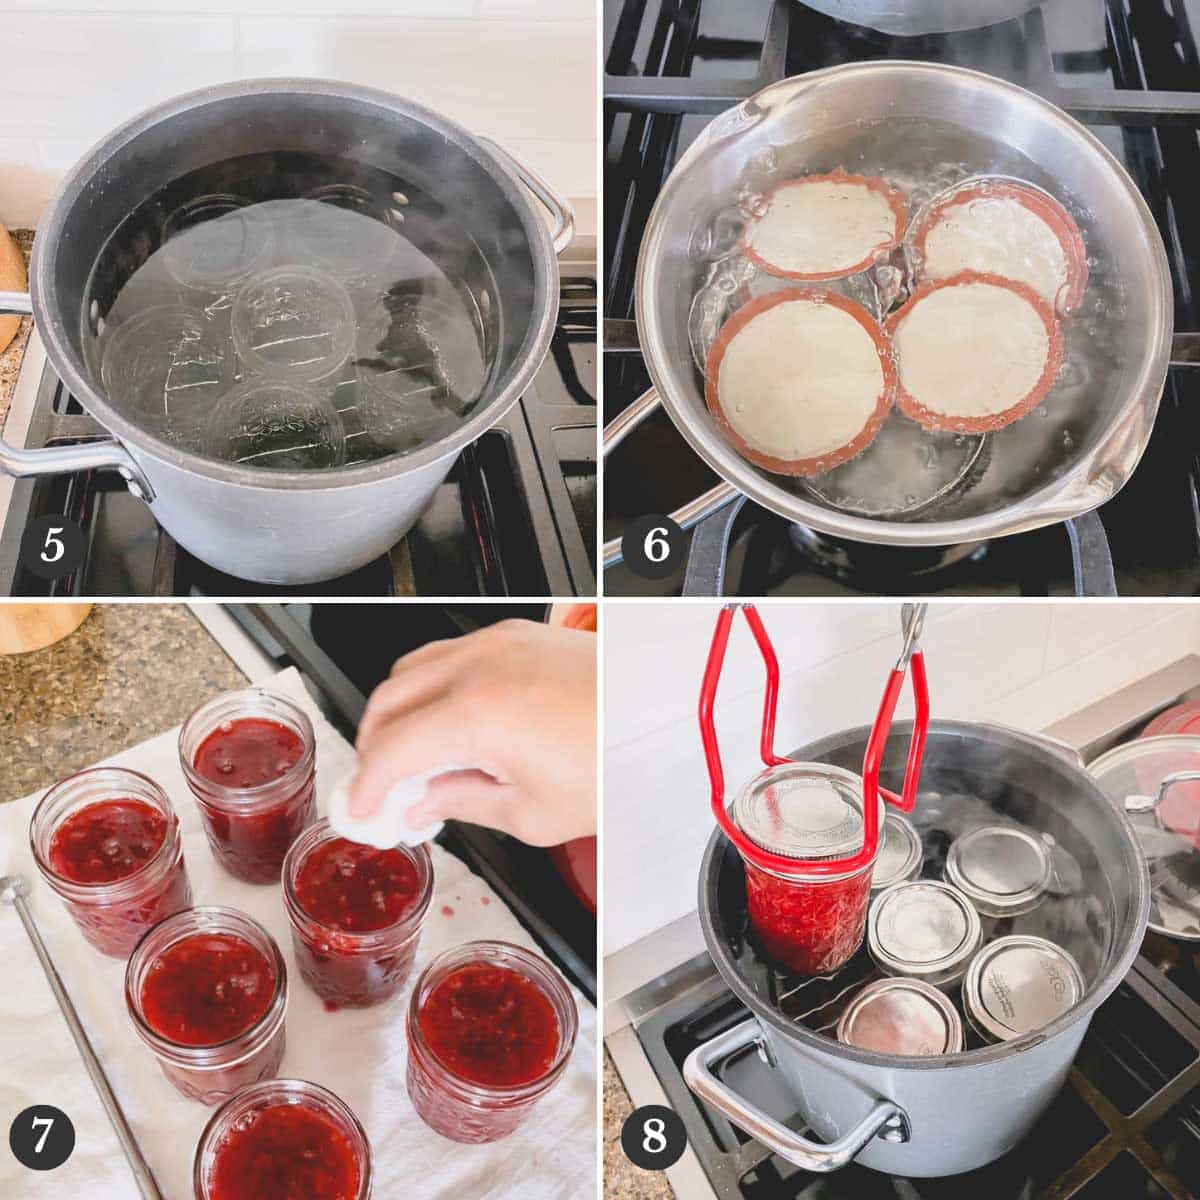 Step by step photos of water canning strawberry jam.